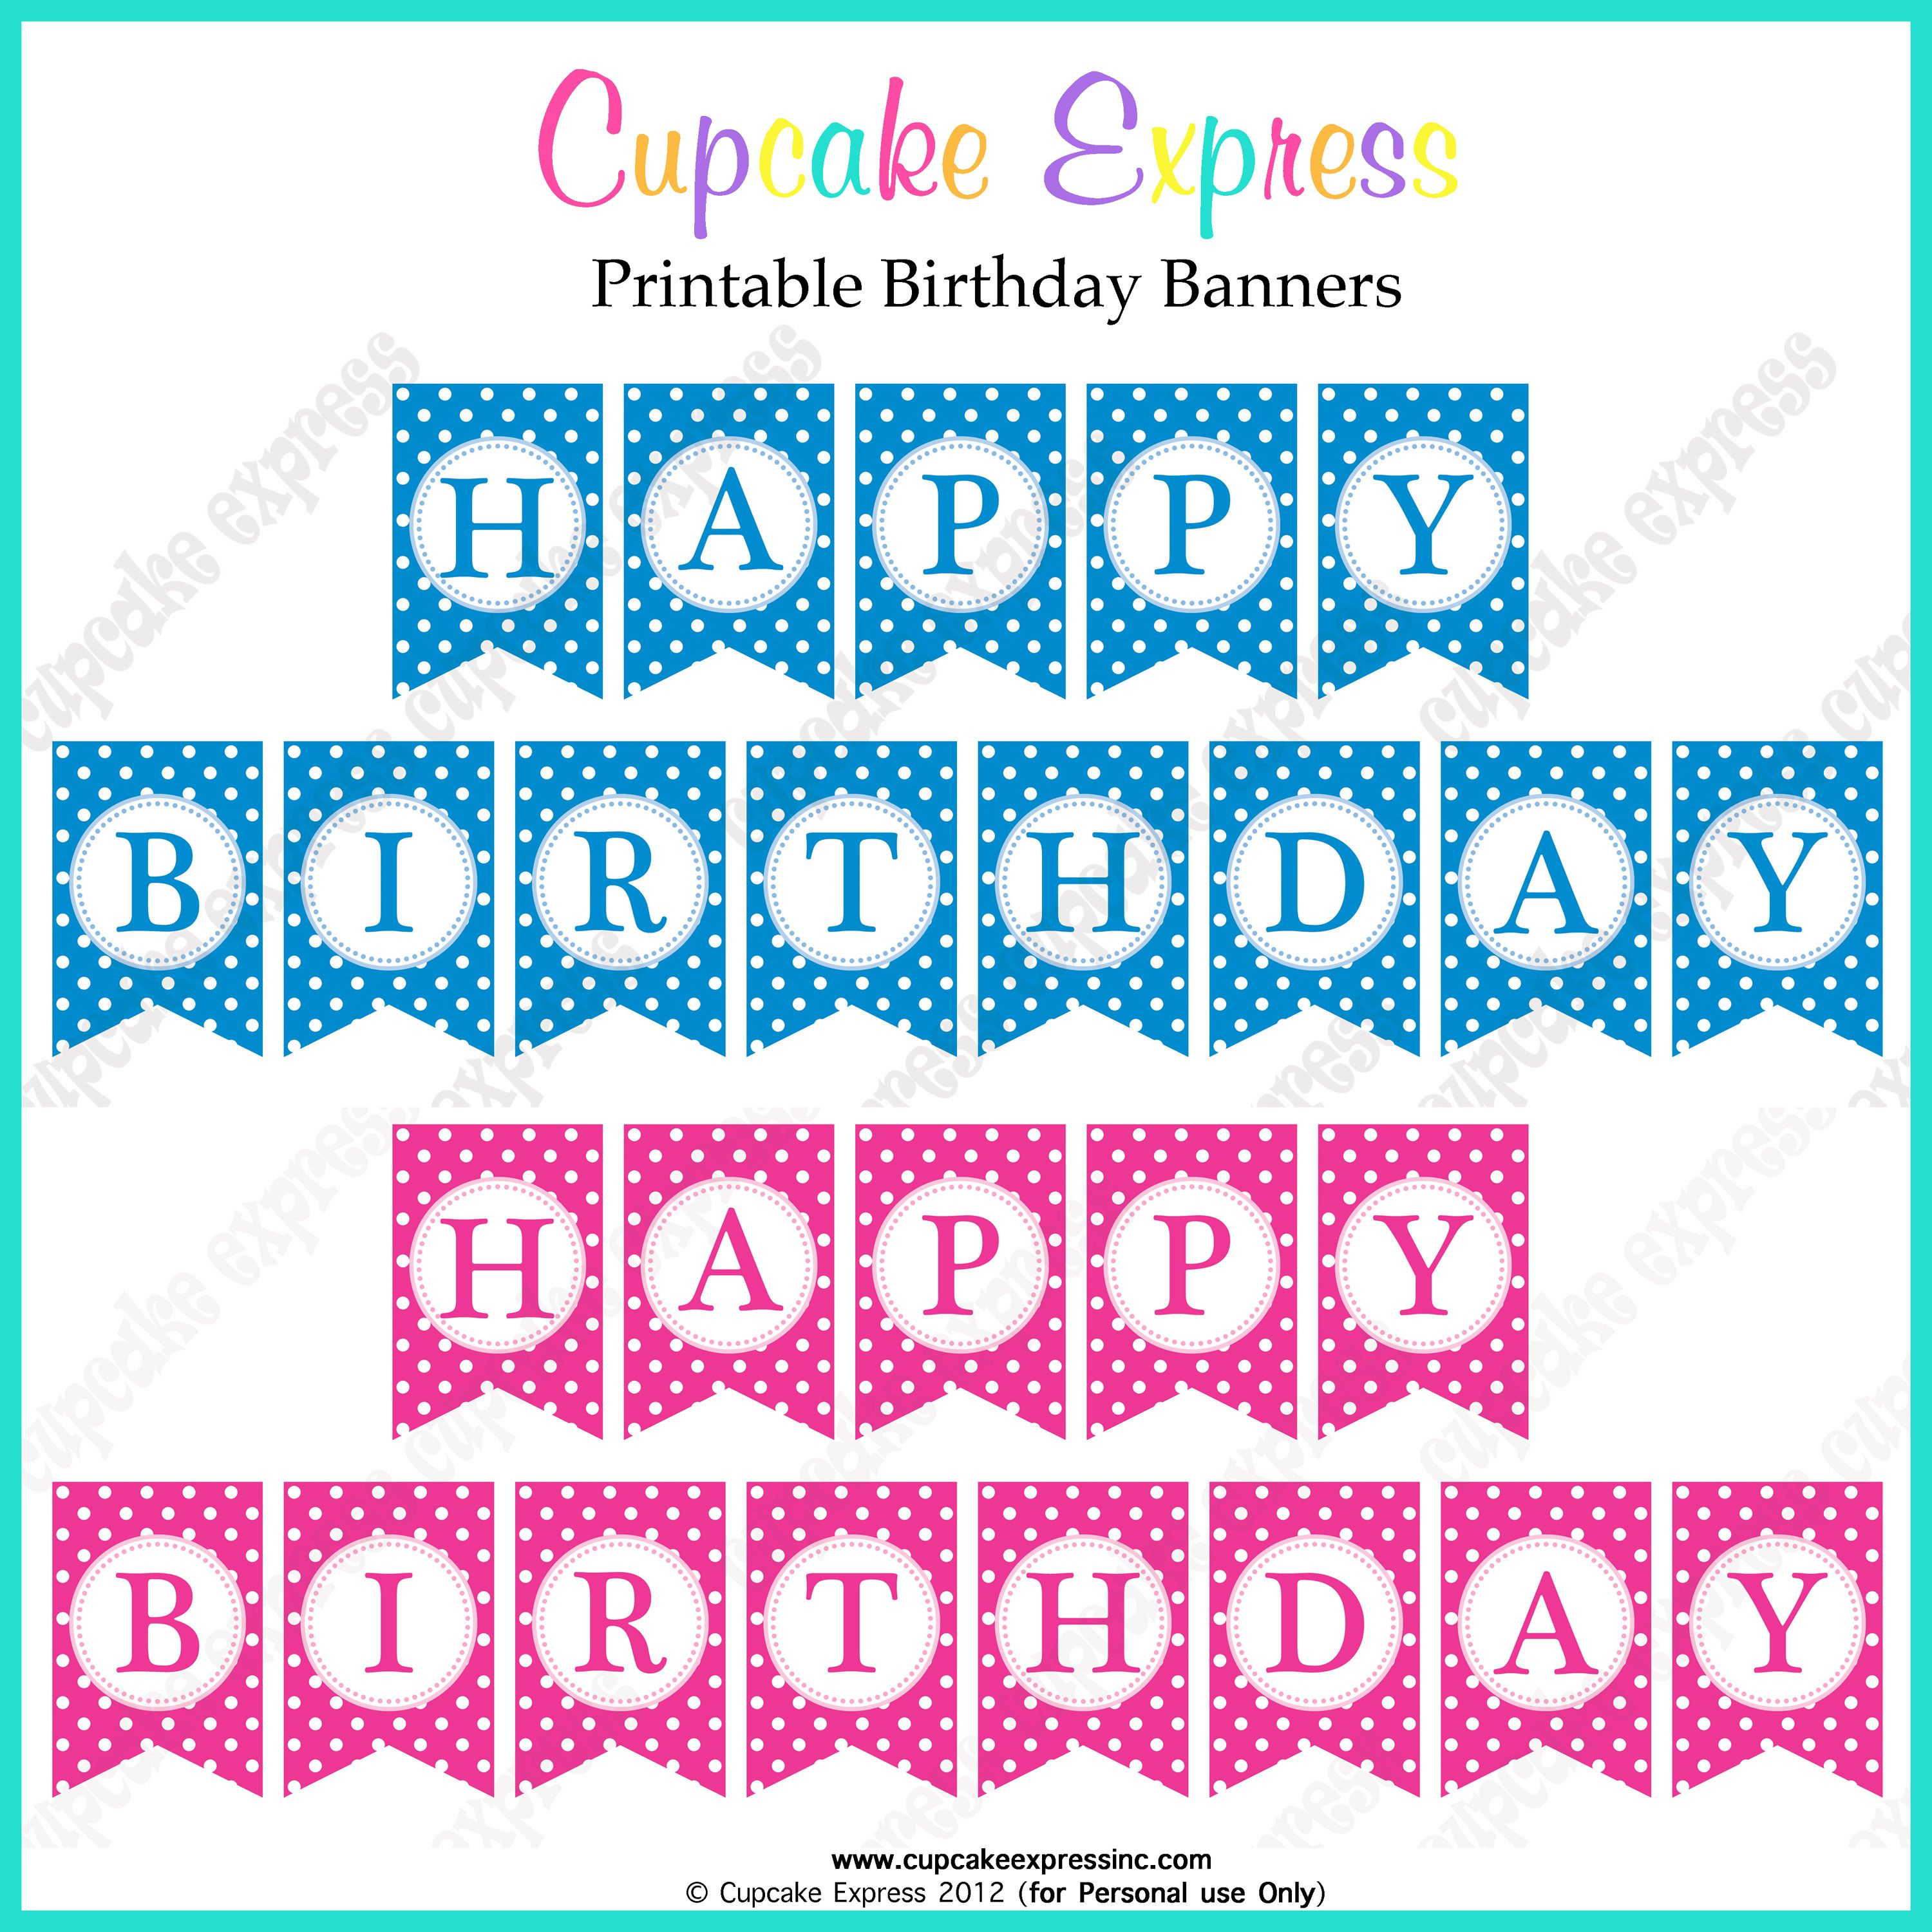 Free Printable Happy Birthday Banners Pink Blue | Free Printables - Happy Birthday Free Printable